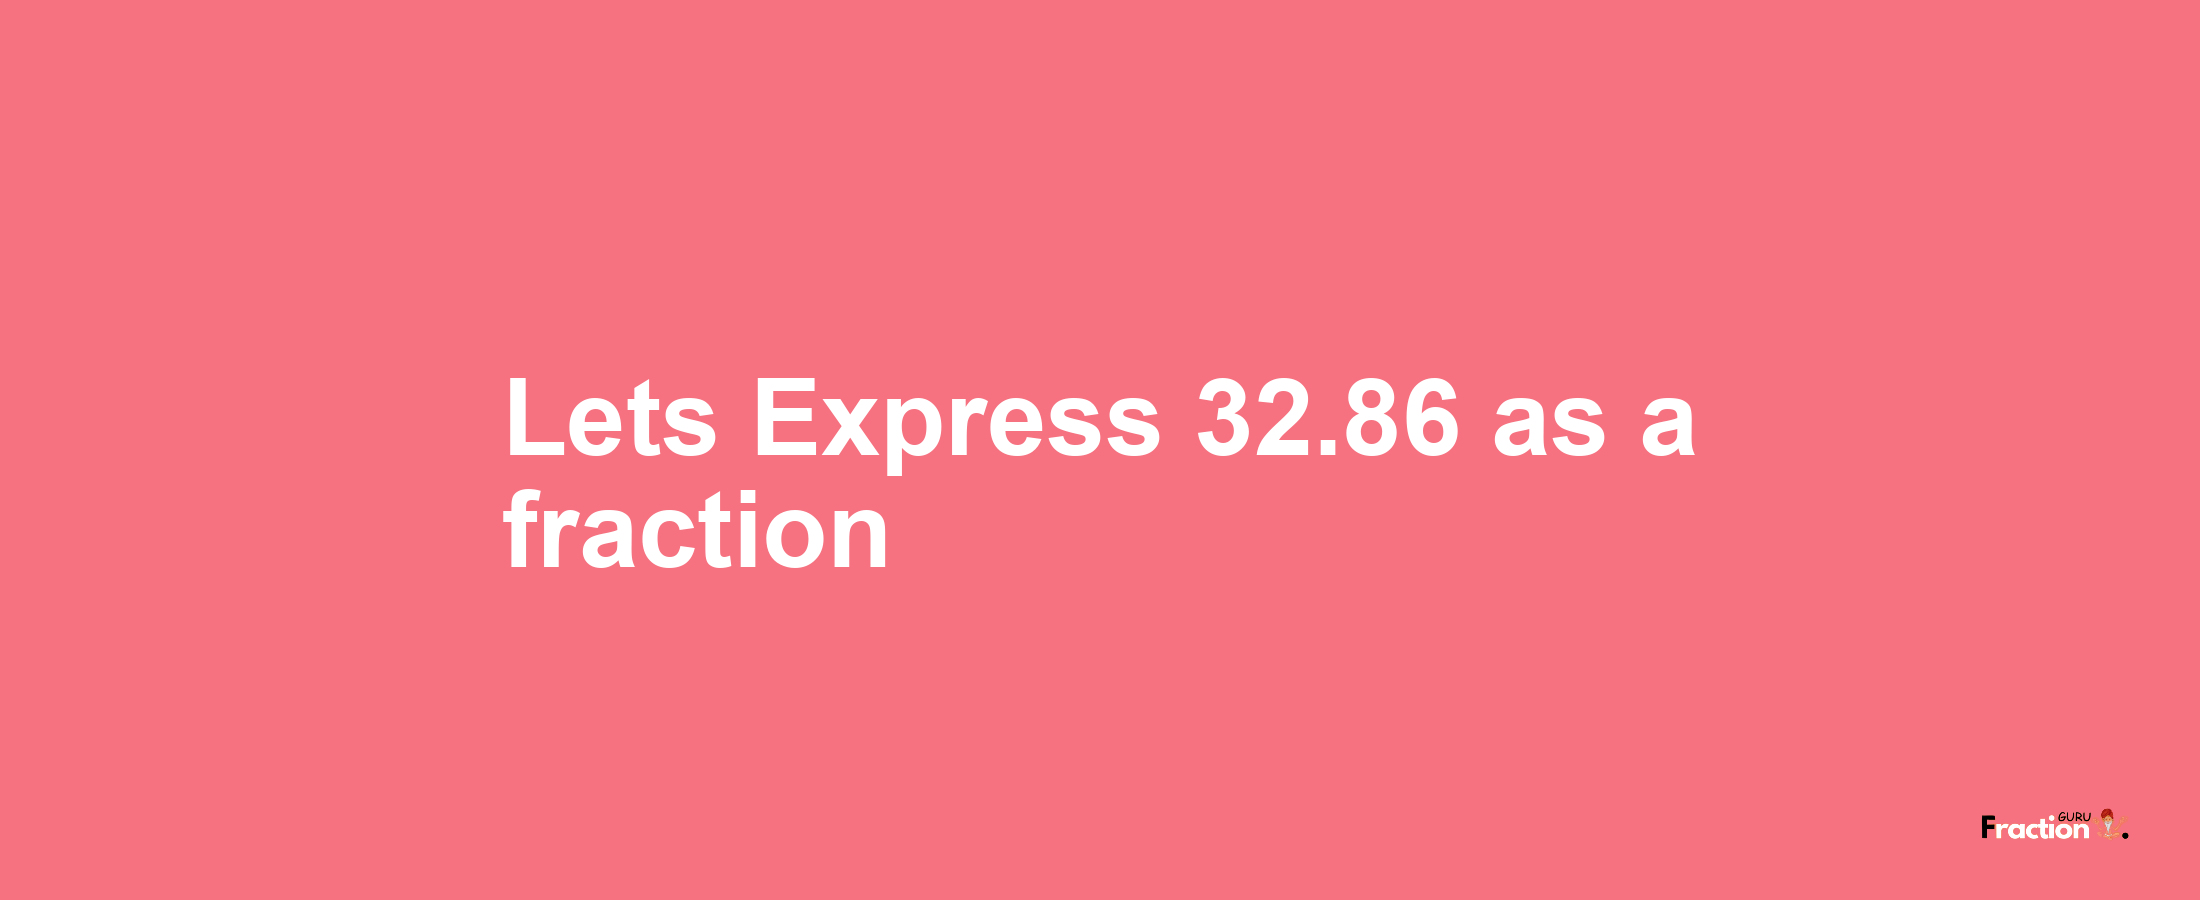 Lets Express 32.86 as afraction